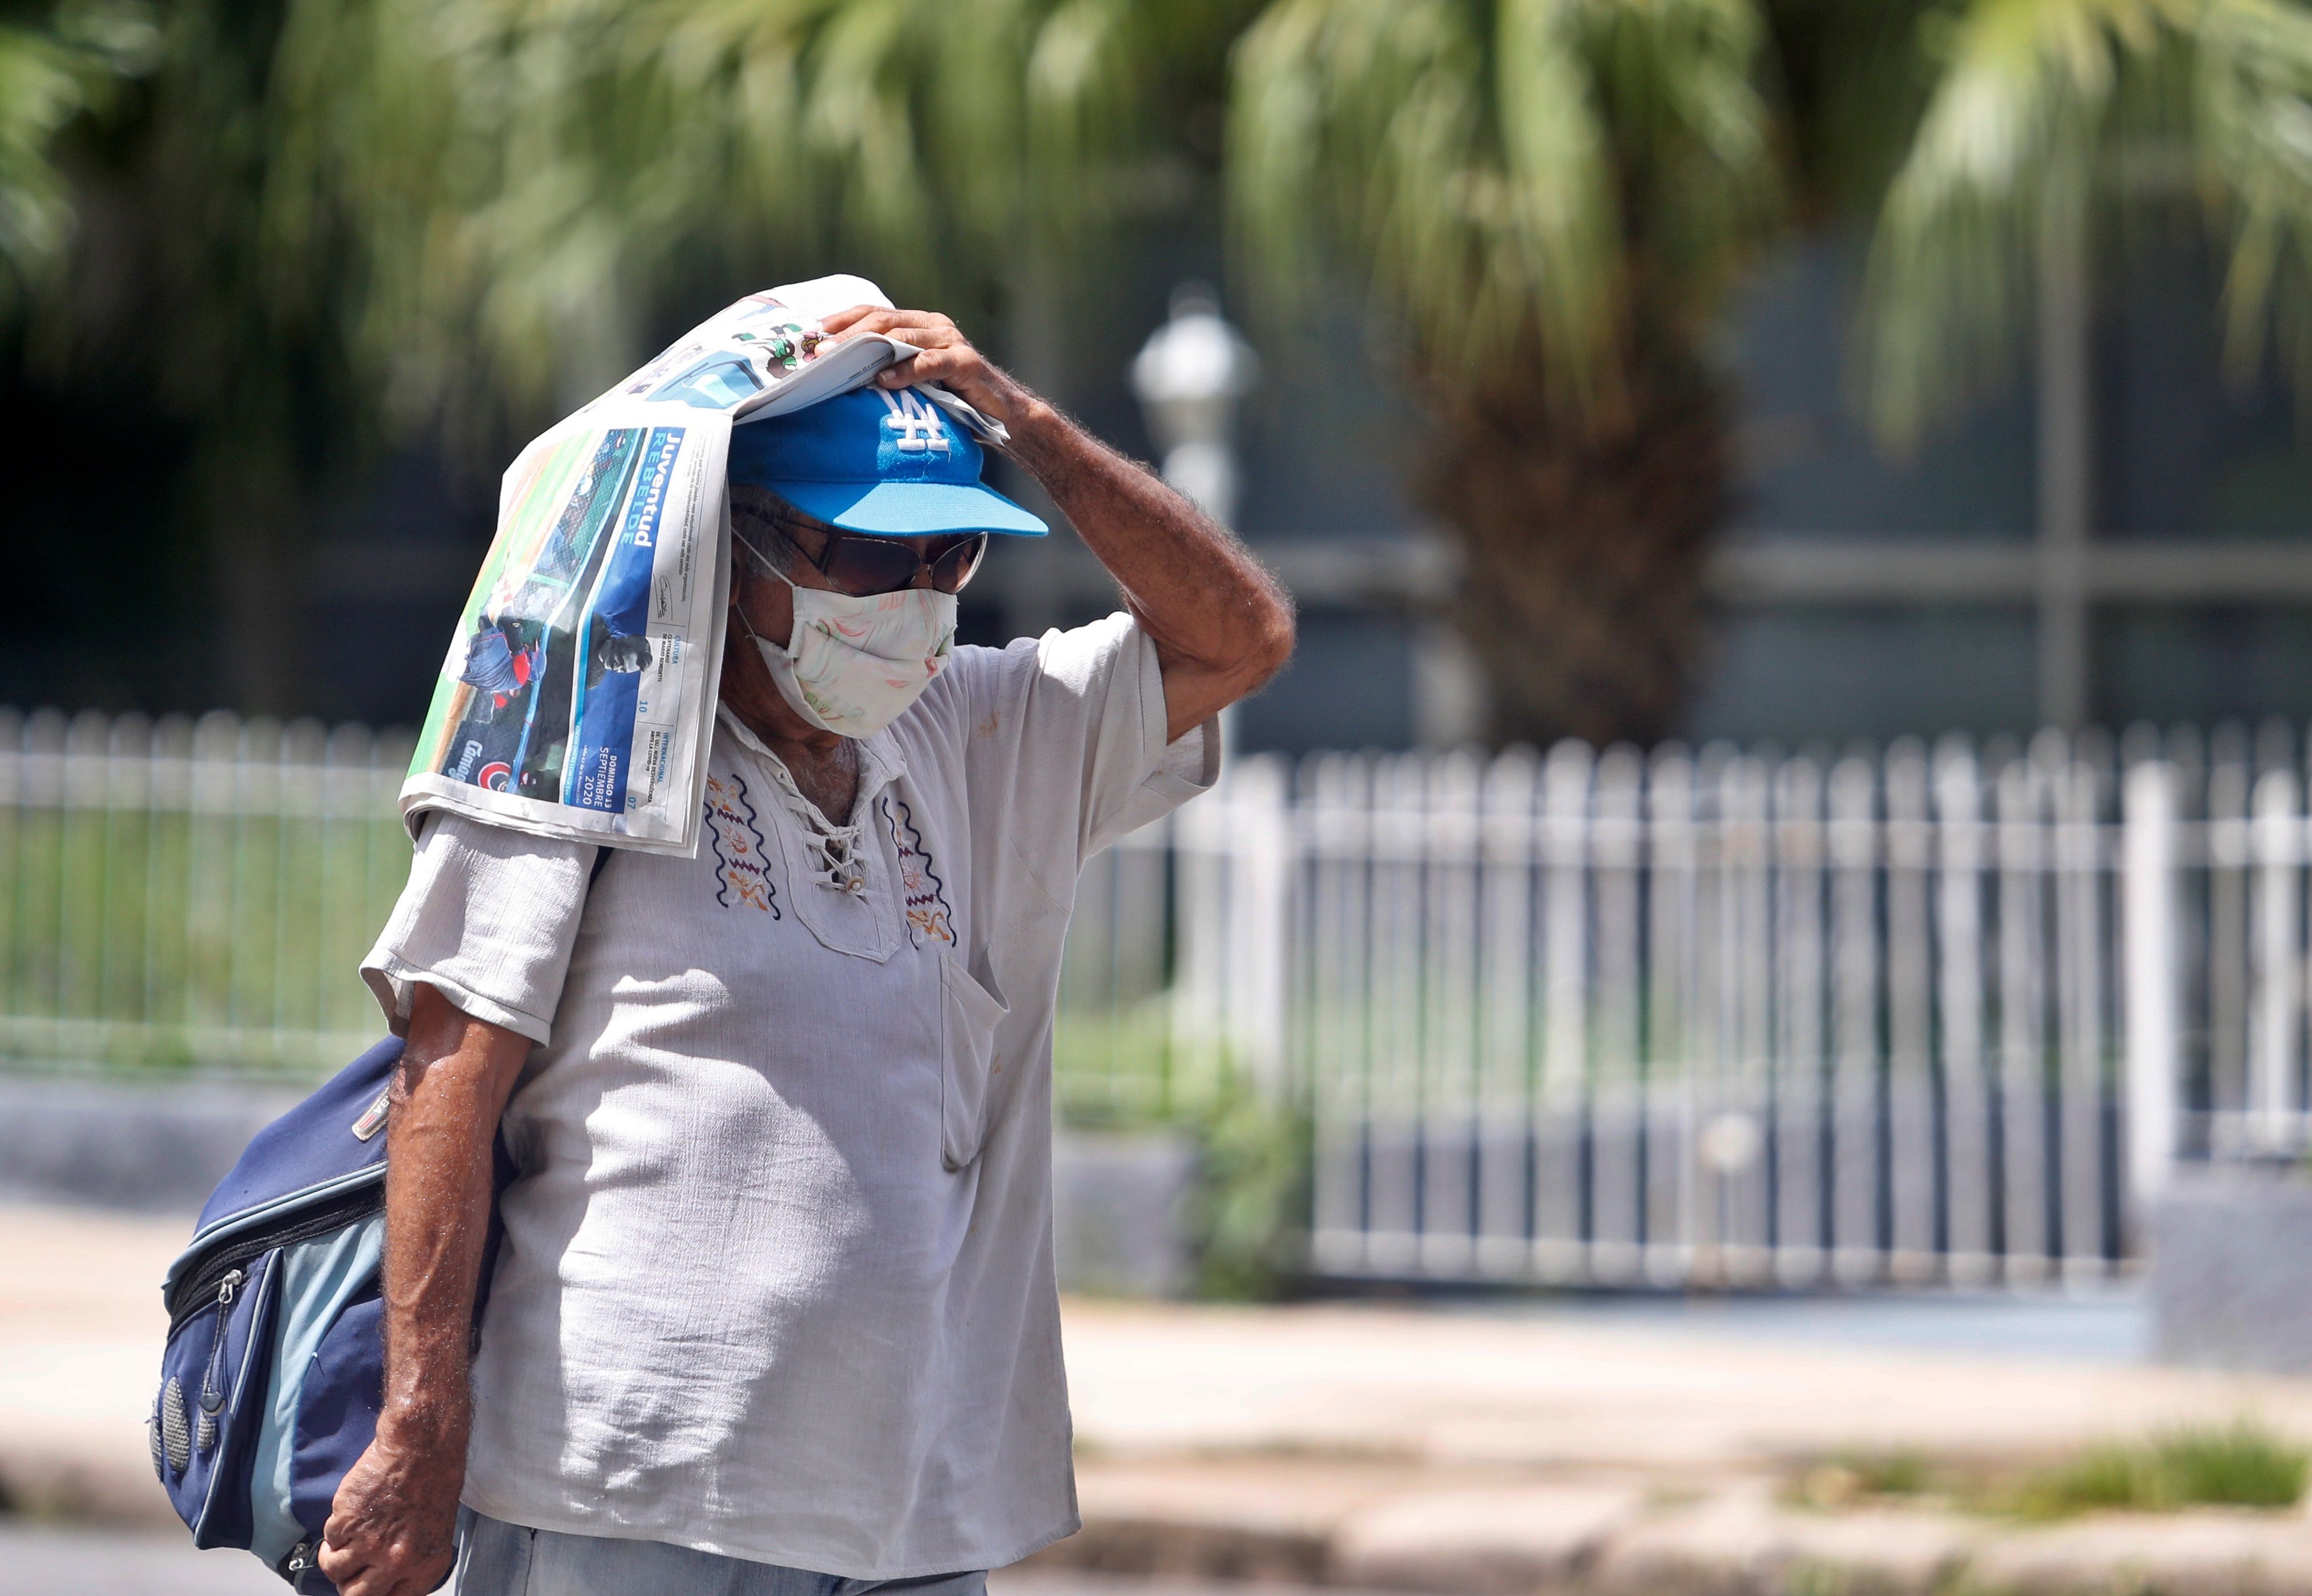 On Thursday, a maximum of 37 degrees Celsius was reported, a value that is half a degree higher than the record for a month of August in the entire province of Havana (EFE/Yander Zamora/File)